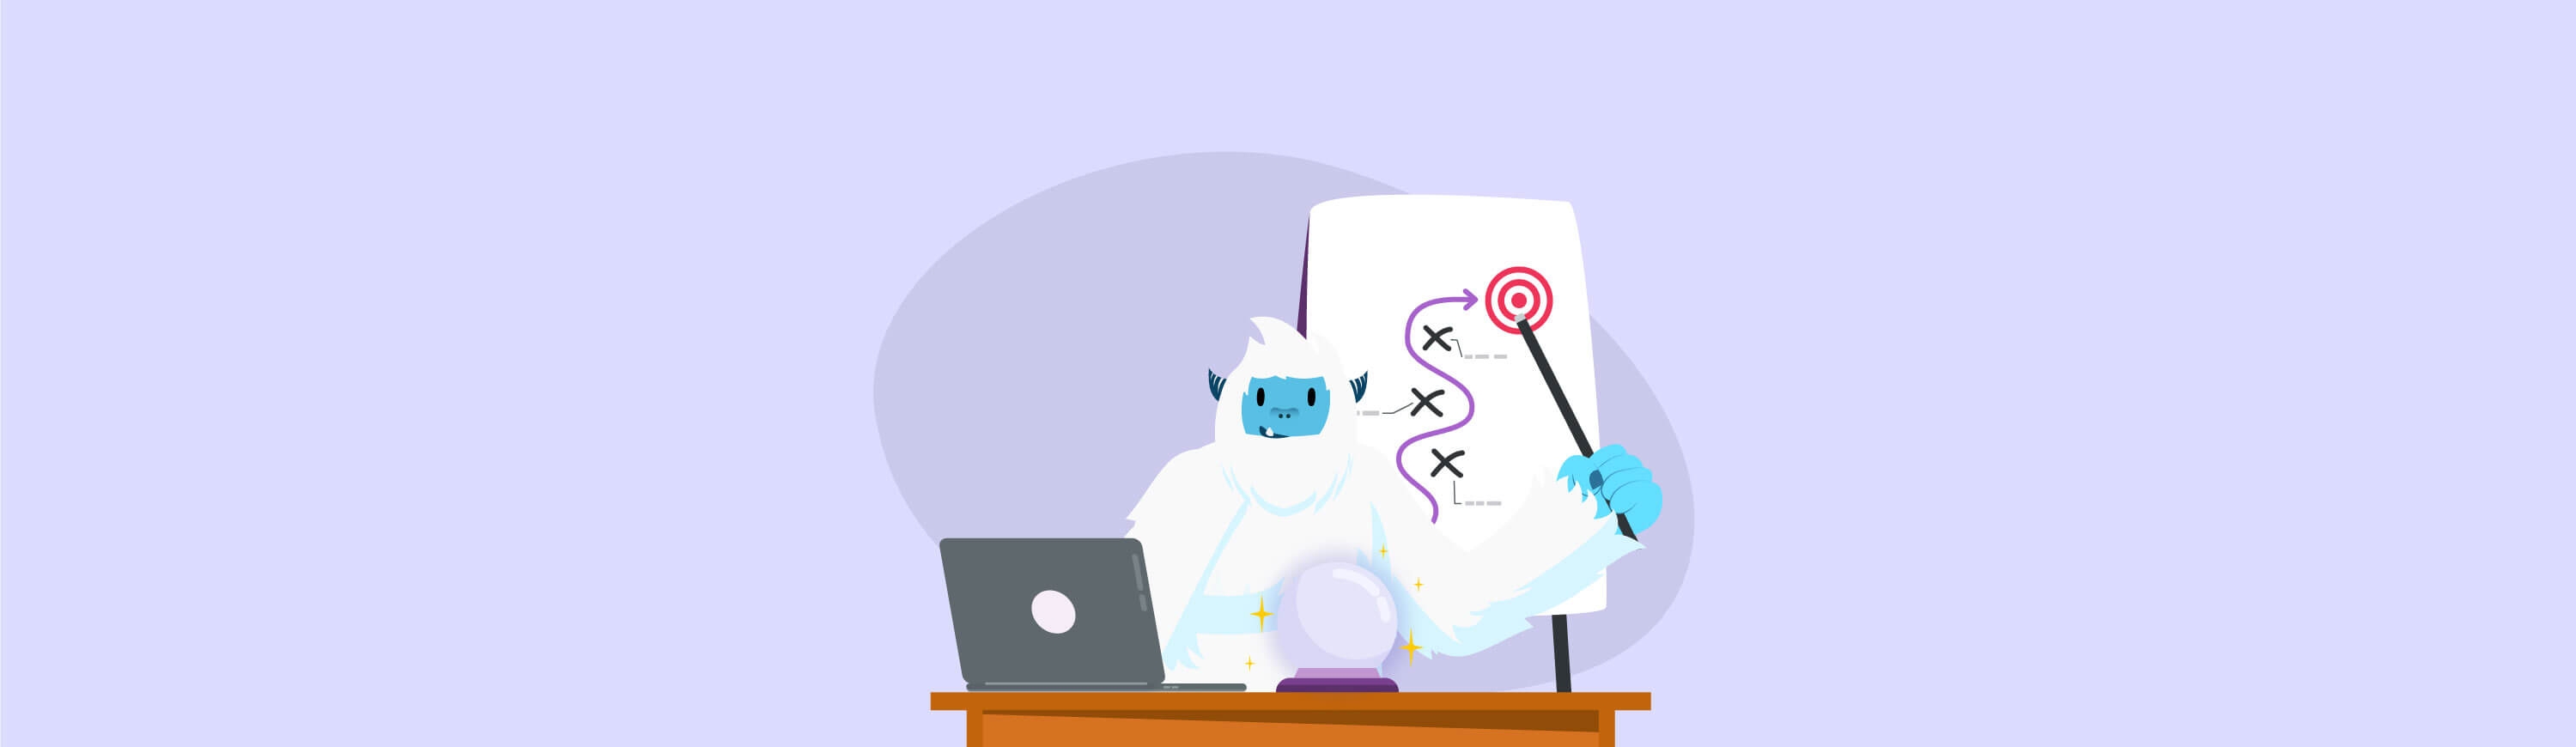 Illustration of Carl the yeti sitting at a desk with a magic wand and ball with a laptop.